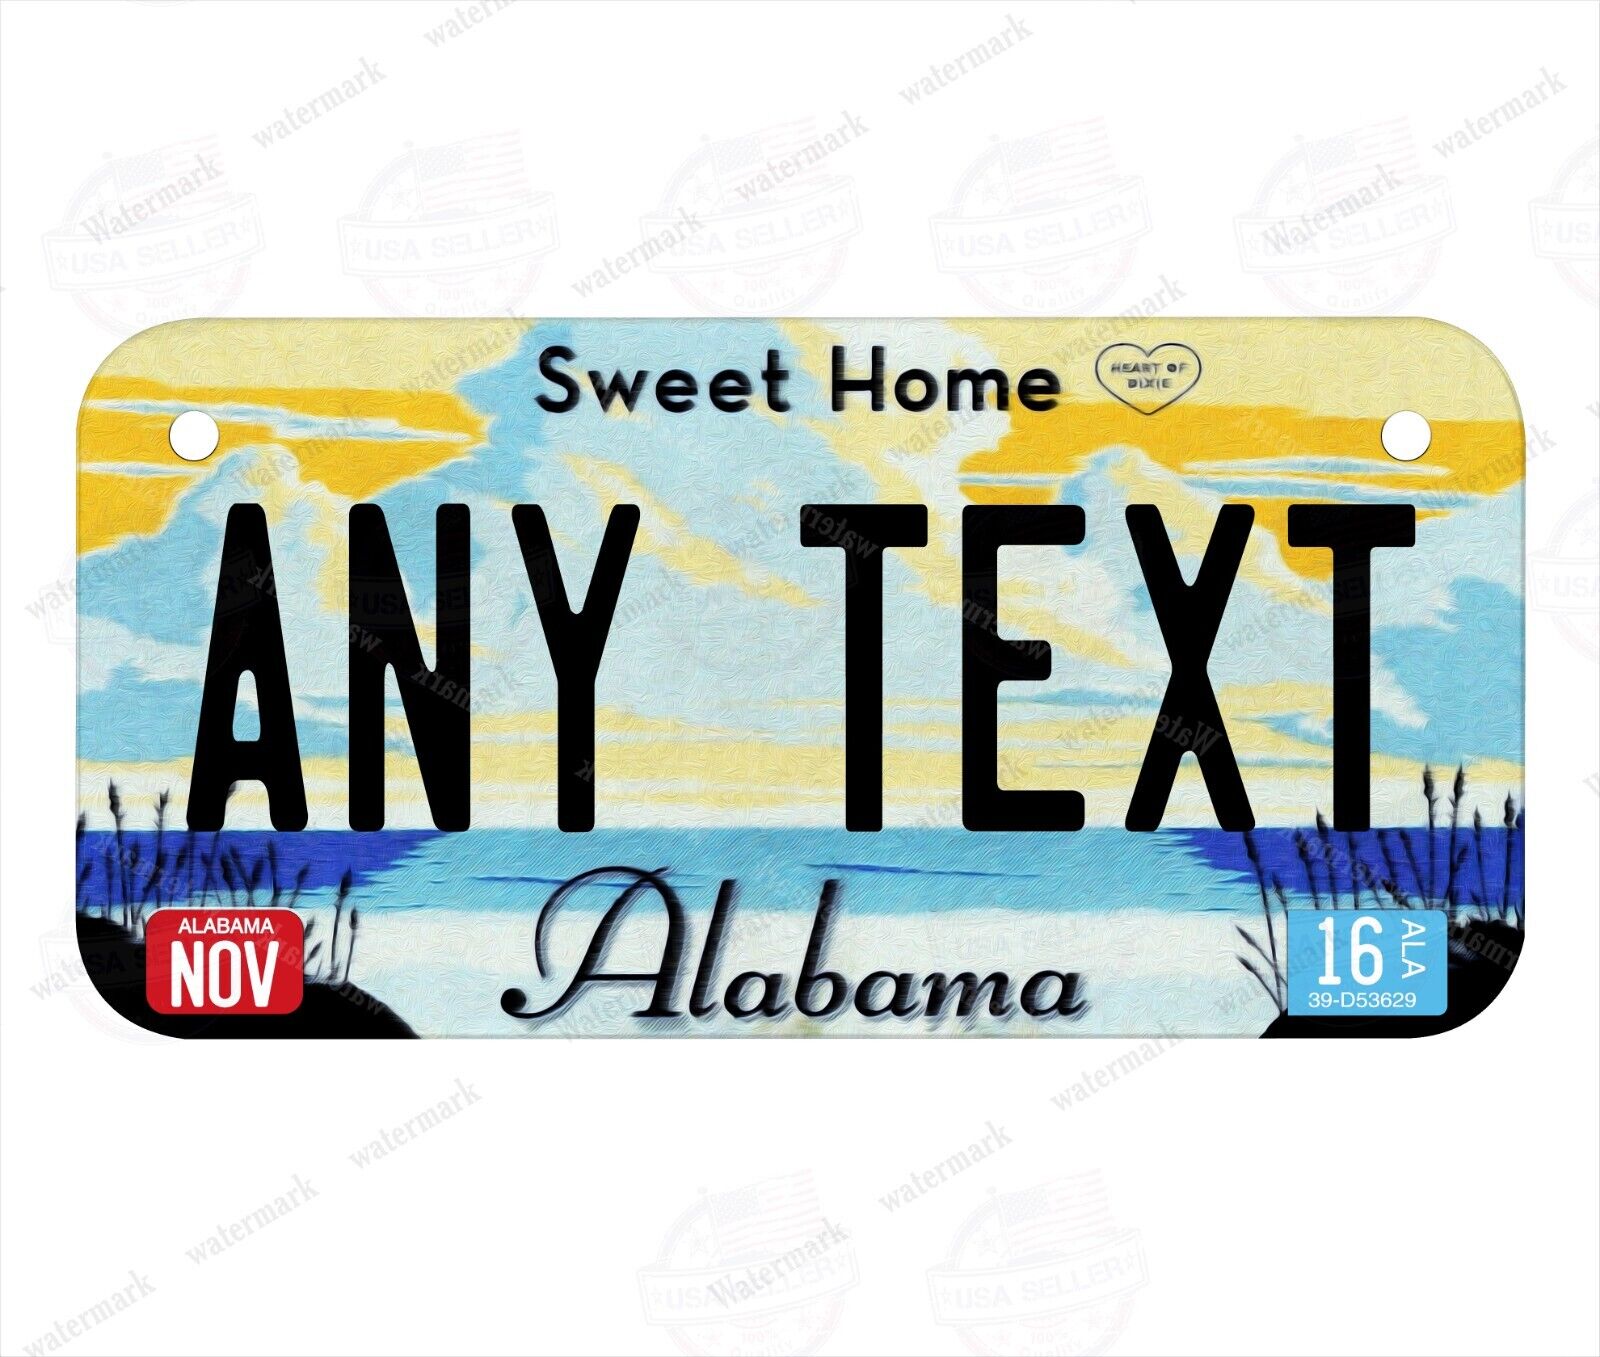 Any Text Mini License Plate Tag for Kids Ride Toy Adult Bicycle Children Bikes